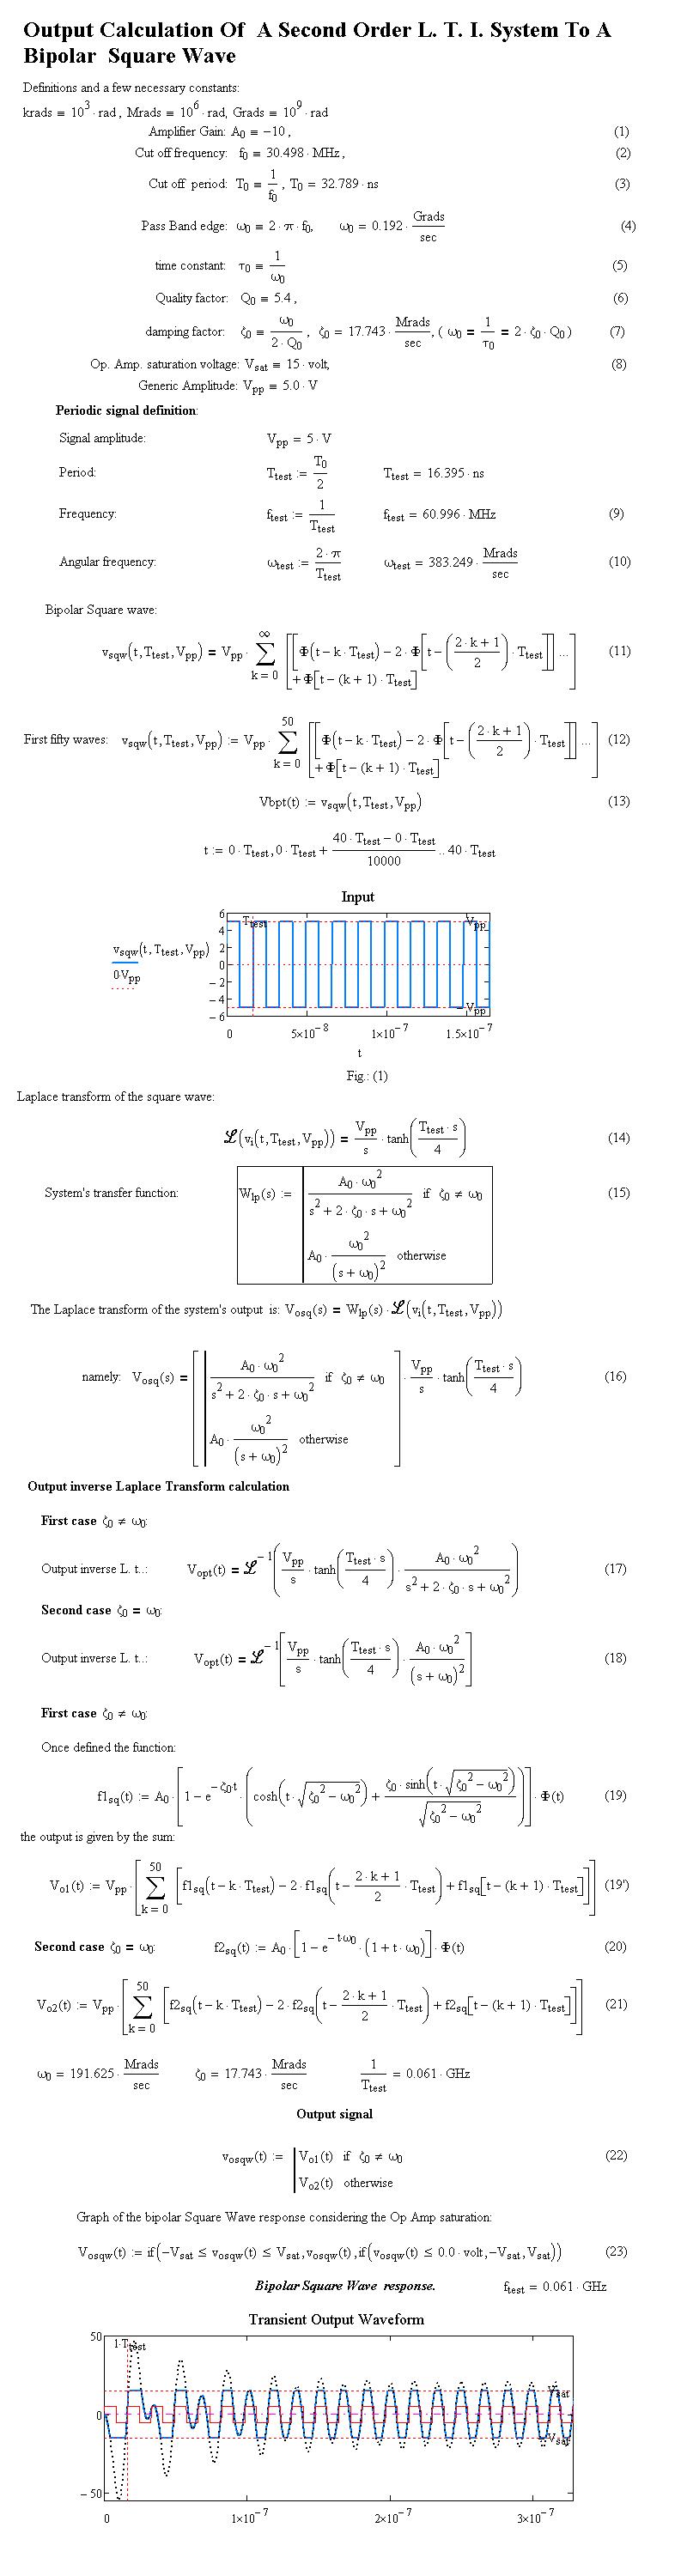 Output Calculation Of  A Second Order L. T. I. System To A   Bipolar Square Wave.JPG